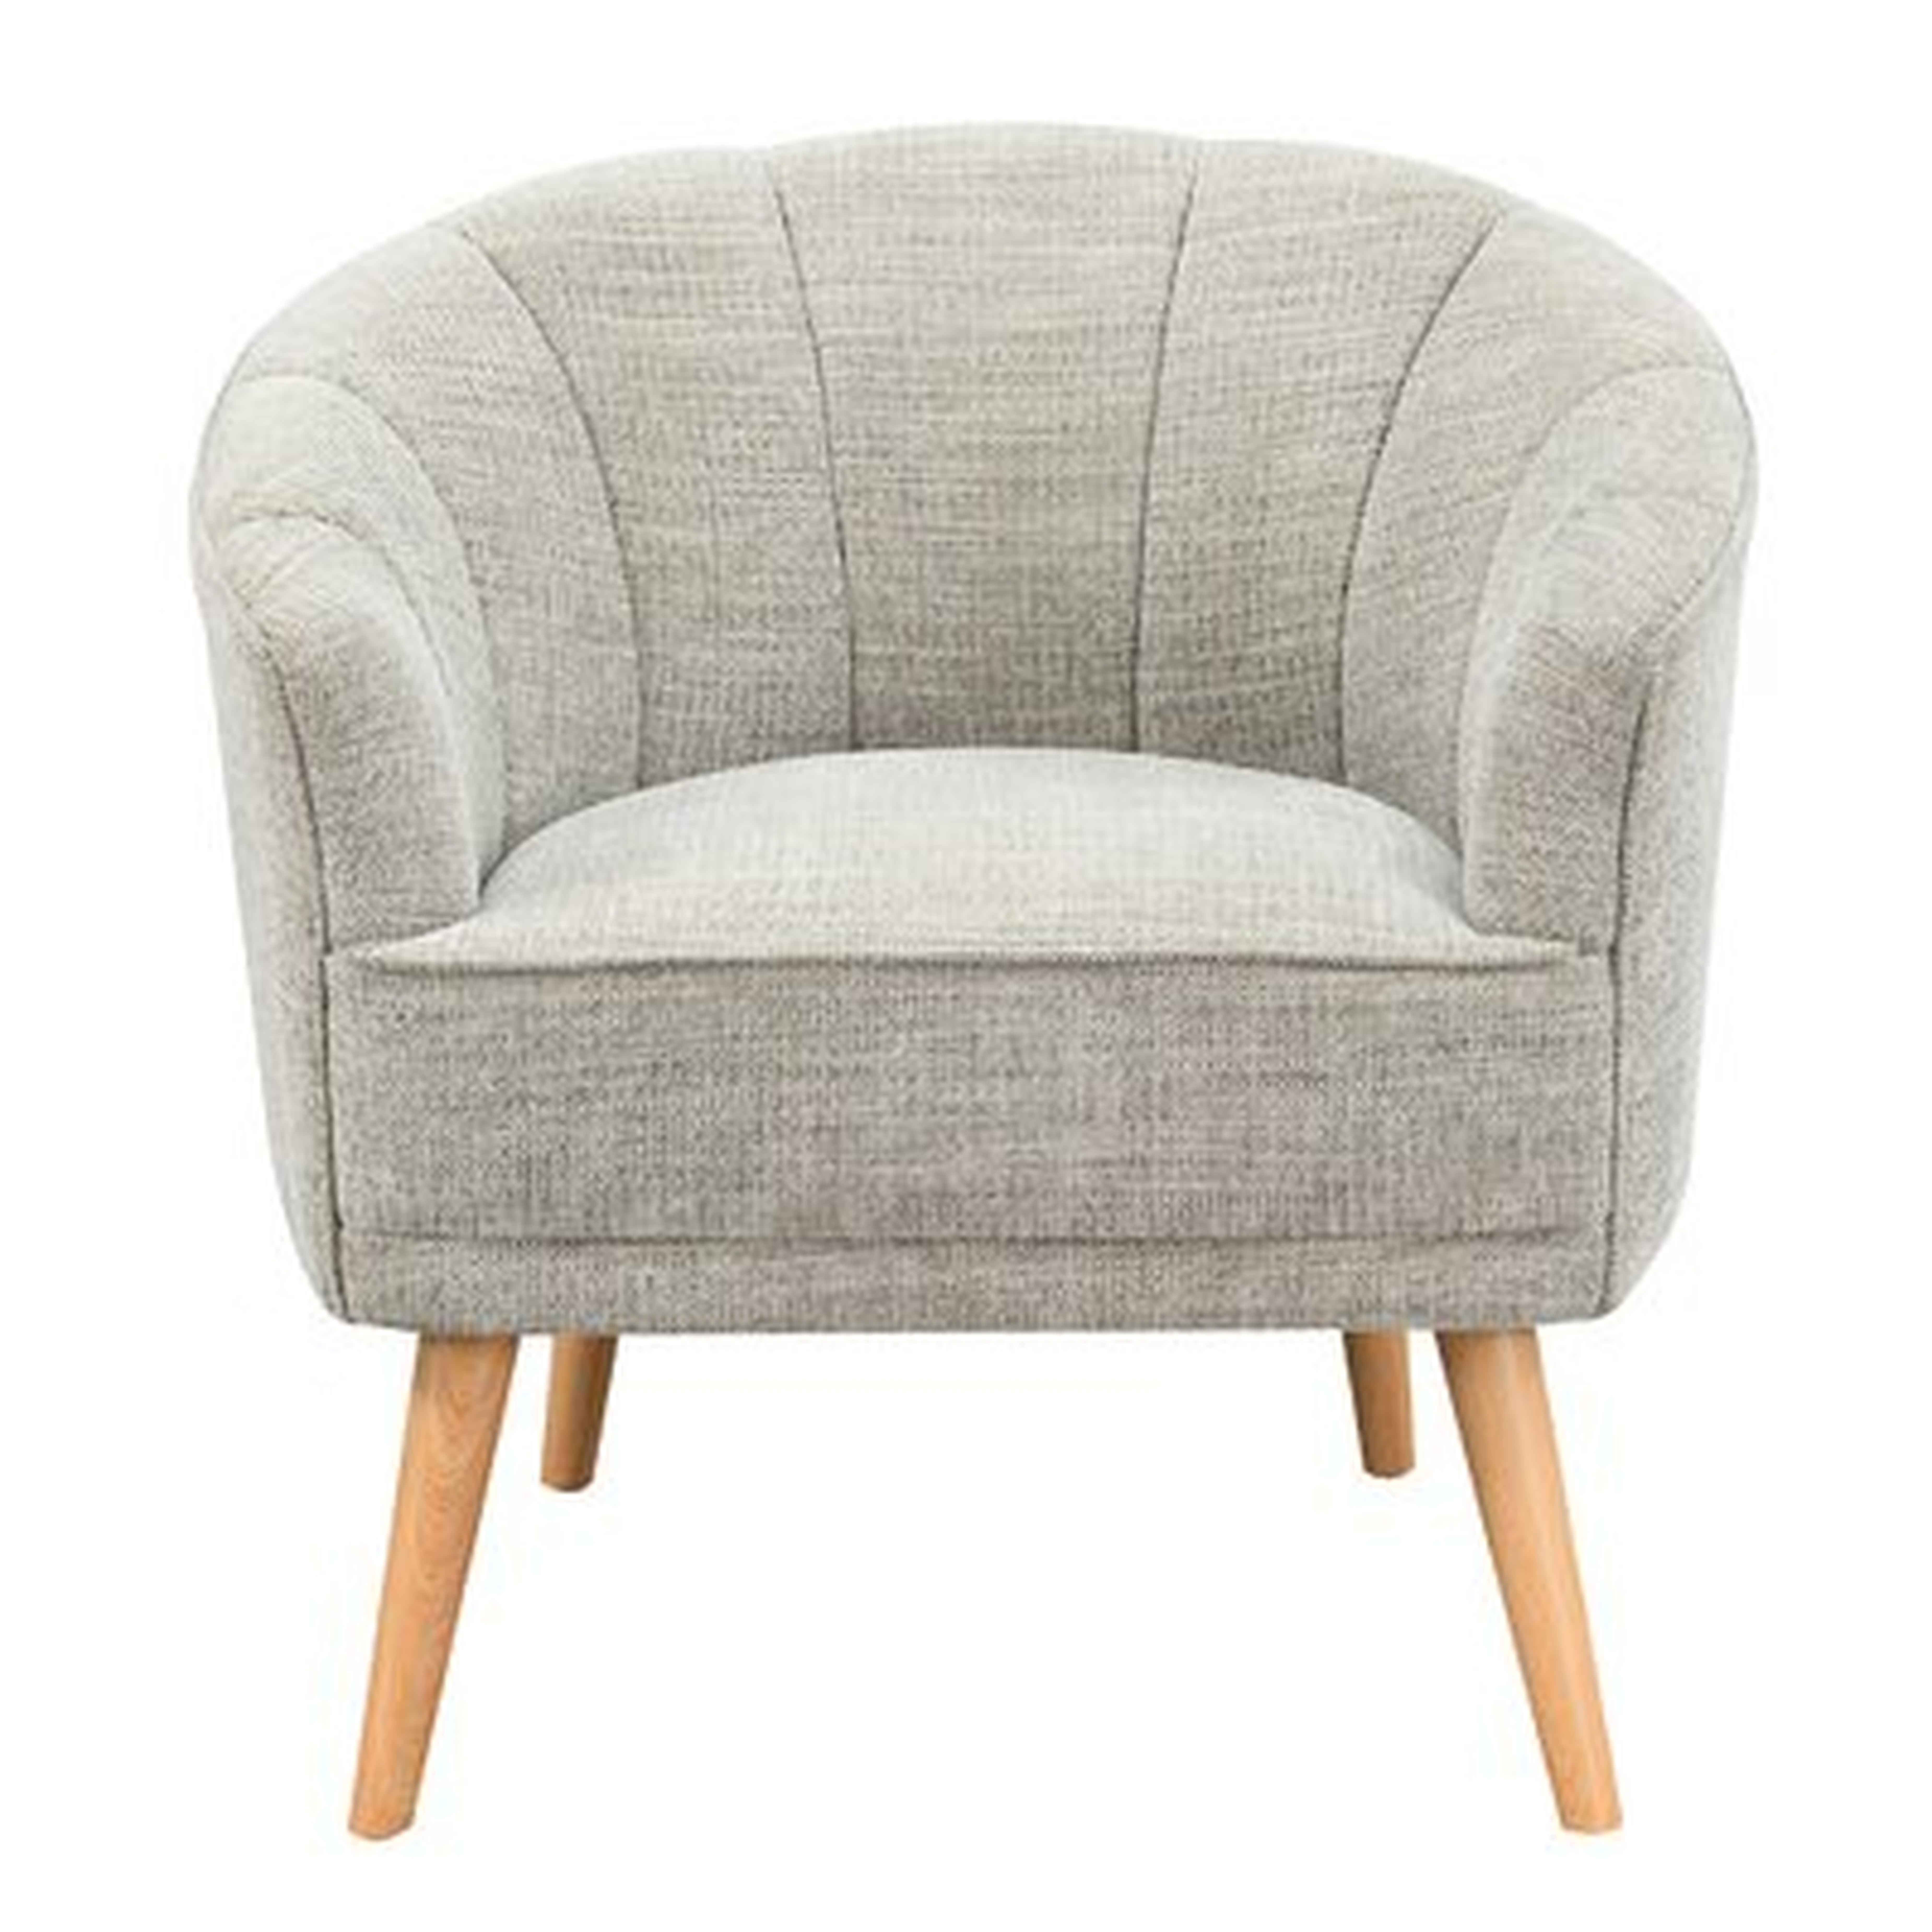 Humes 27.6" W Chenille Barrel Chair - Wayfair